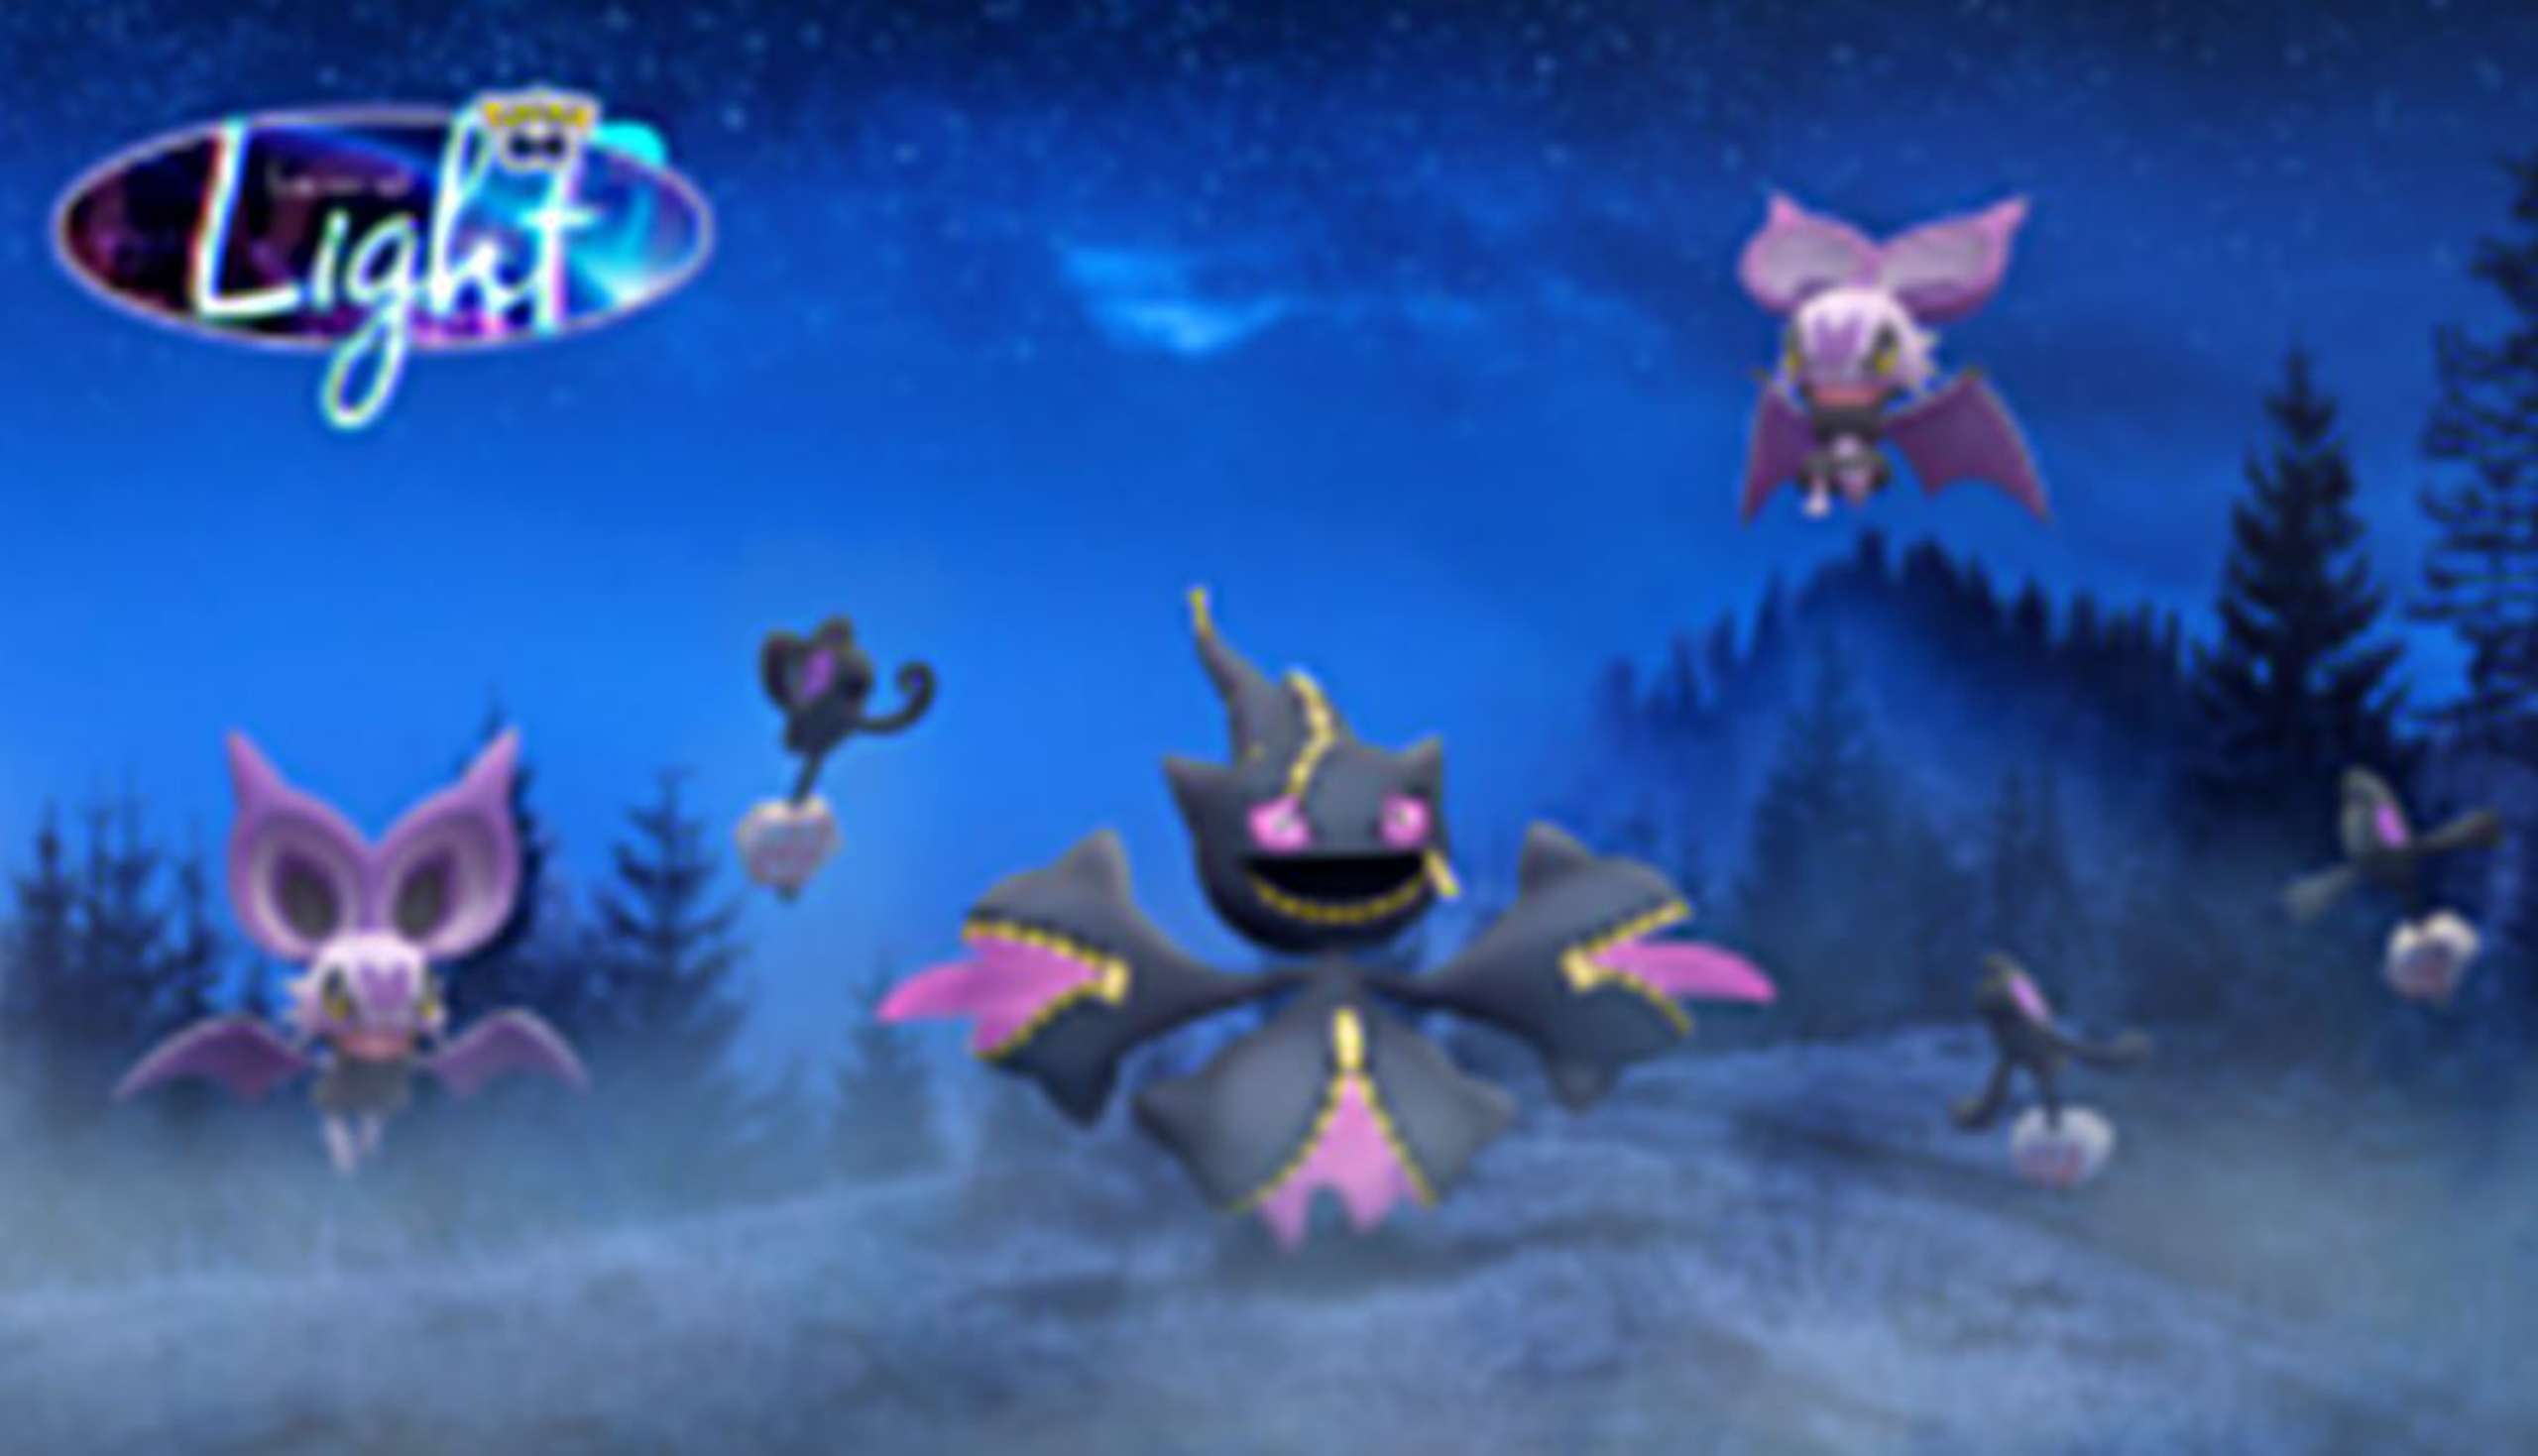 In 2022, Pokémon GO Will Host A Halloween Event Featuring The Debut Of Some Genuinely Terrifying New Pokémon, Such As Mega Banette And Shiny Noibat